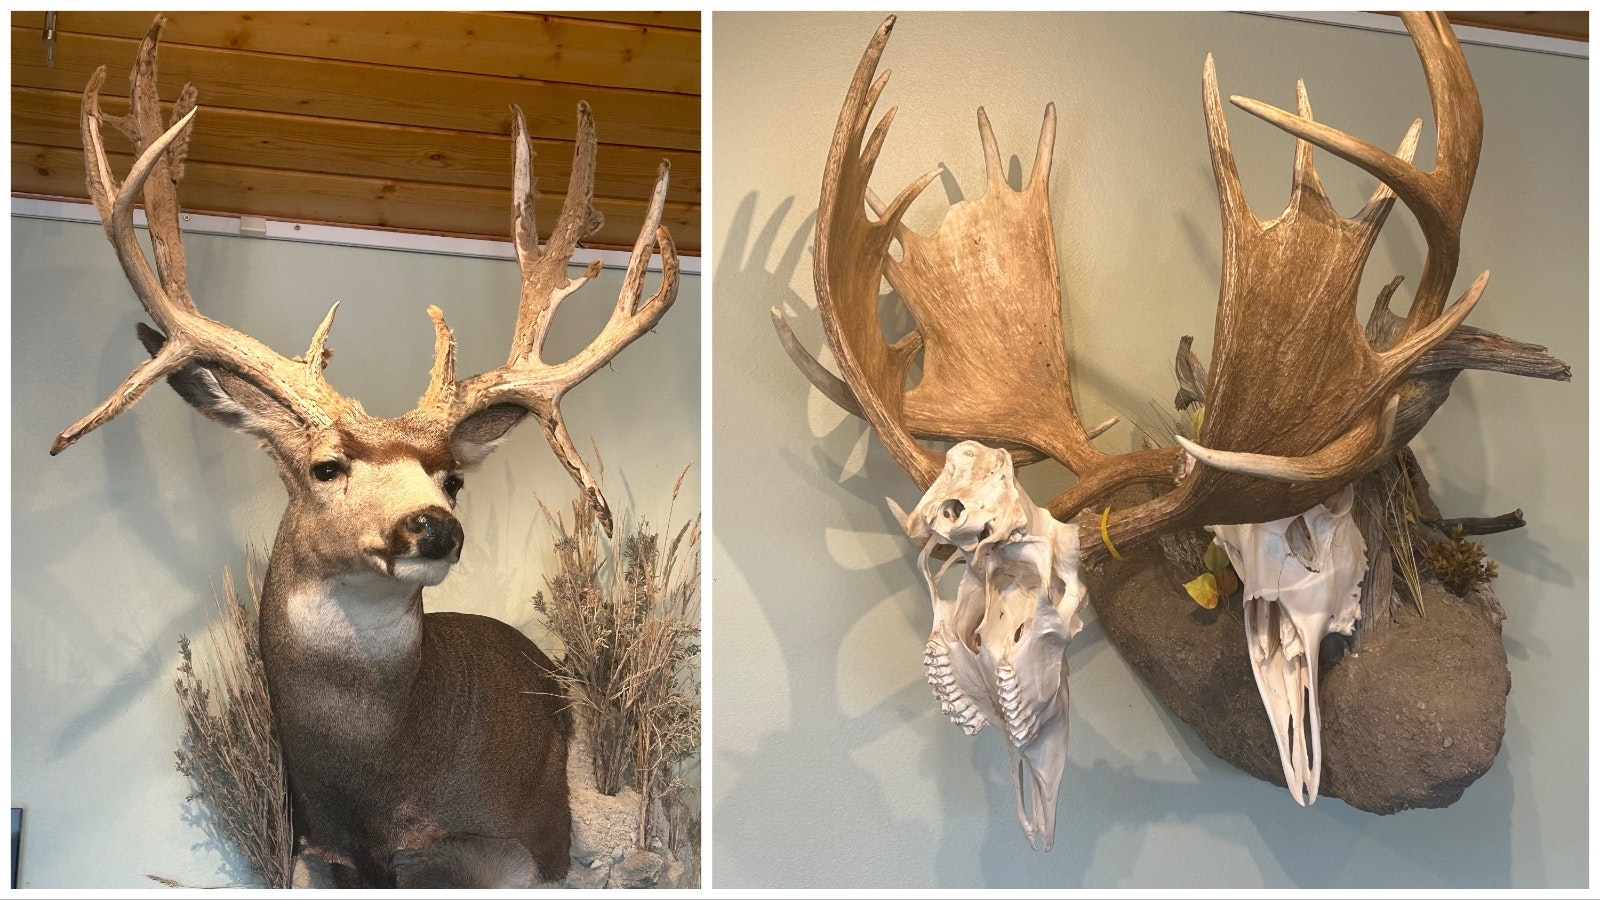 A pair of wildlife oddities are on display at the Seedskadee National Wildlife Refuge: a non-typical buck deer and the antlers of a pair of moose who died while entangled with each other.